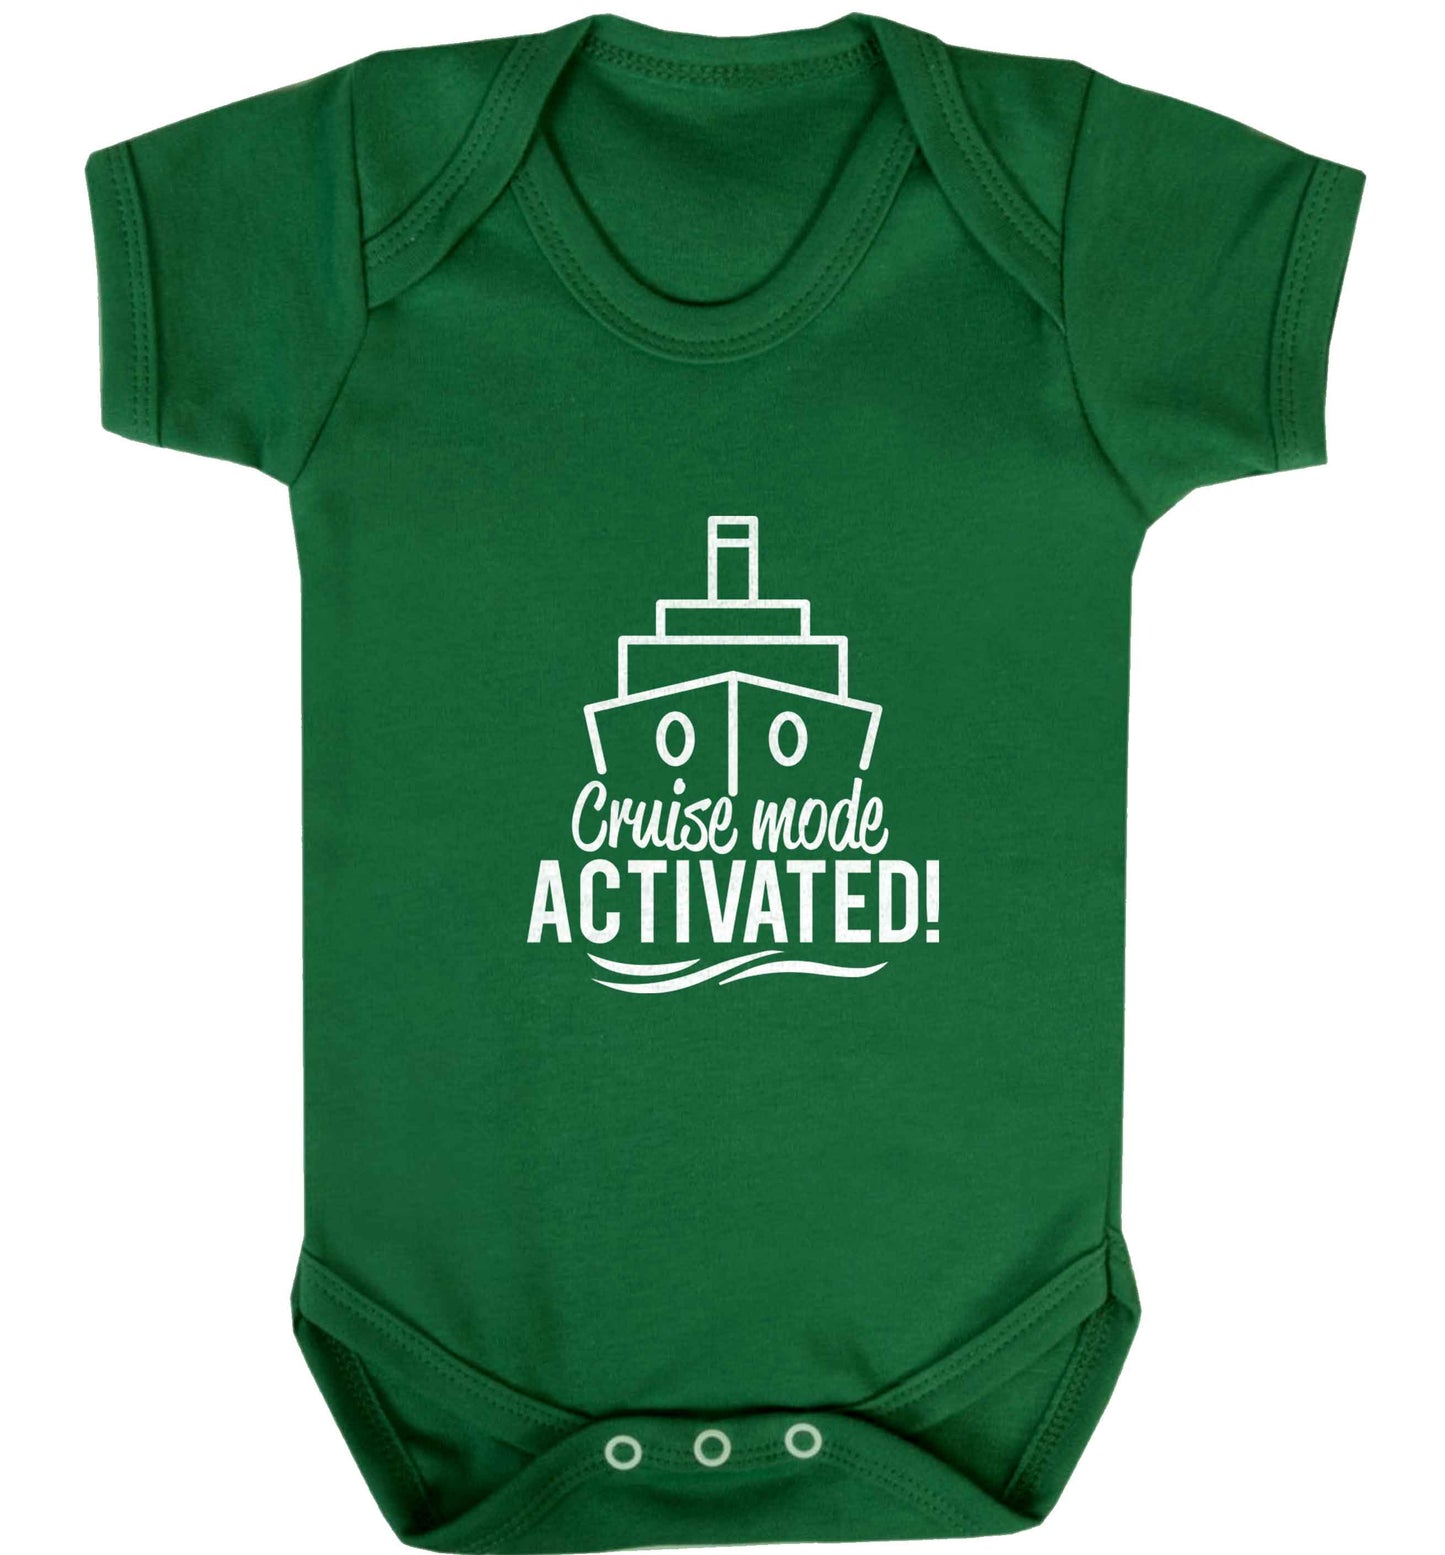 Cruise mode activated baby vest green 18-24 months